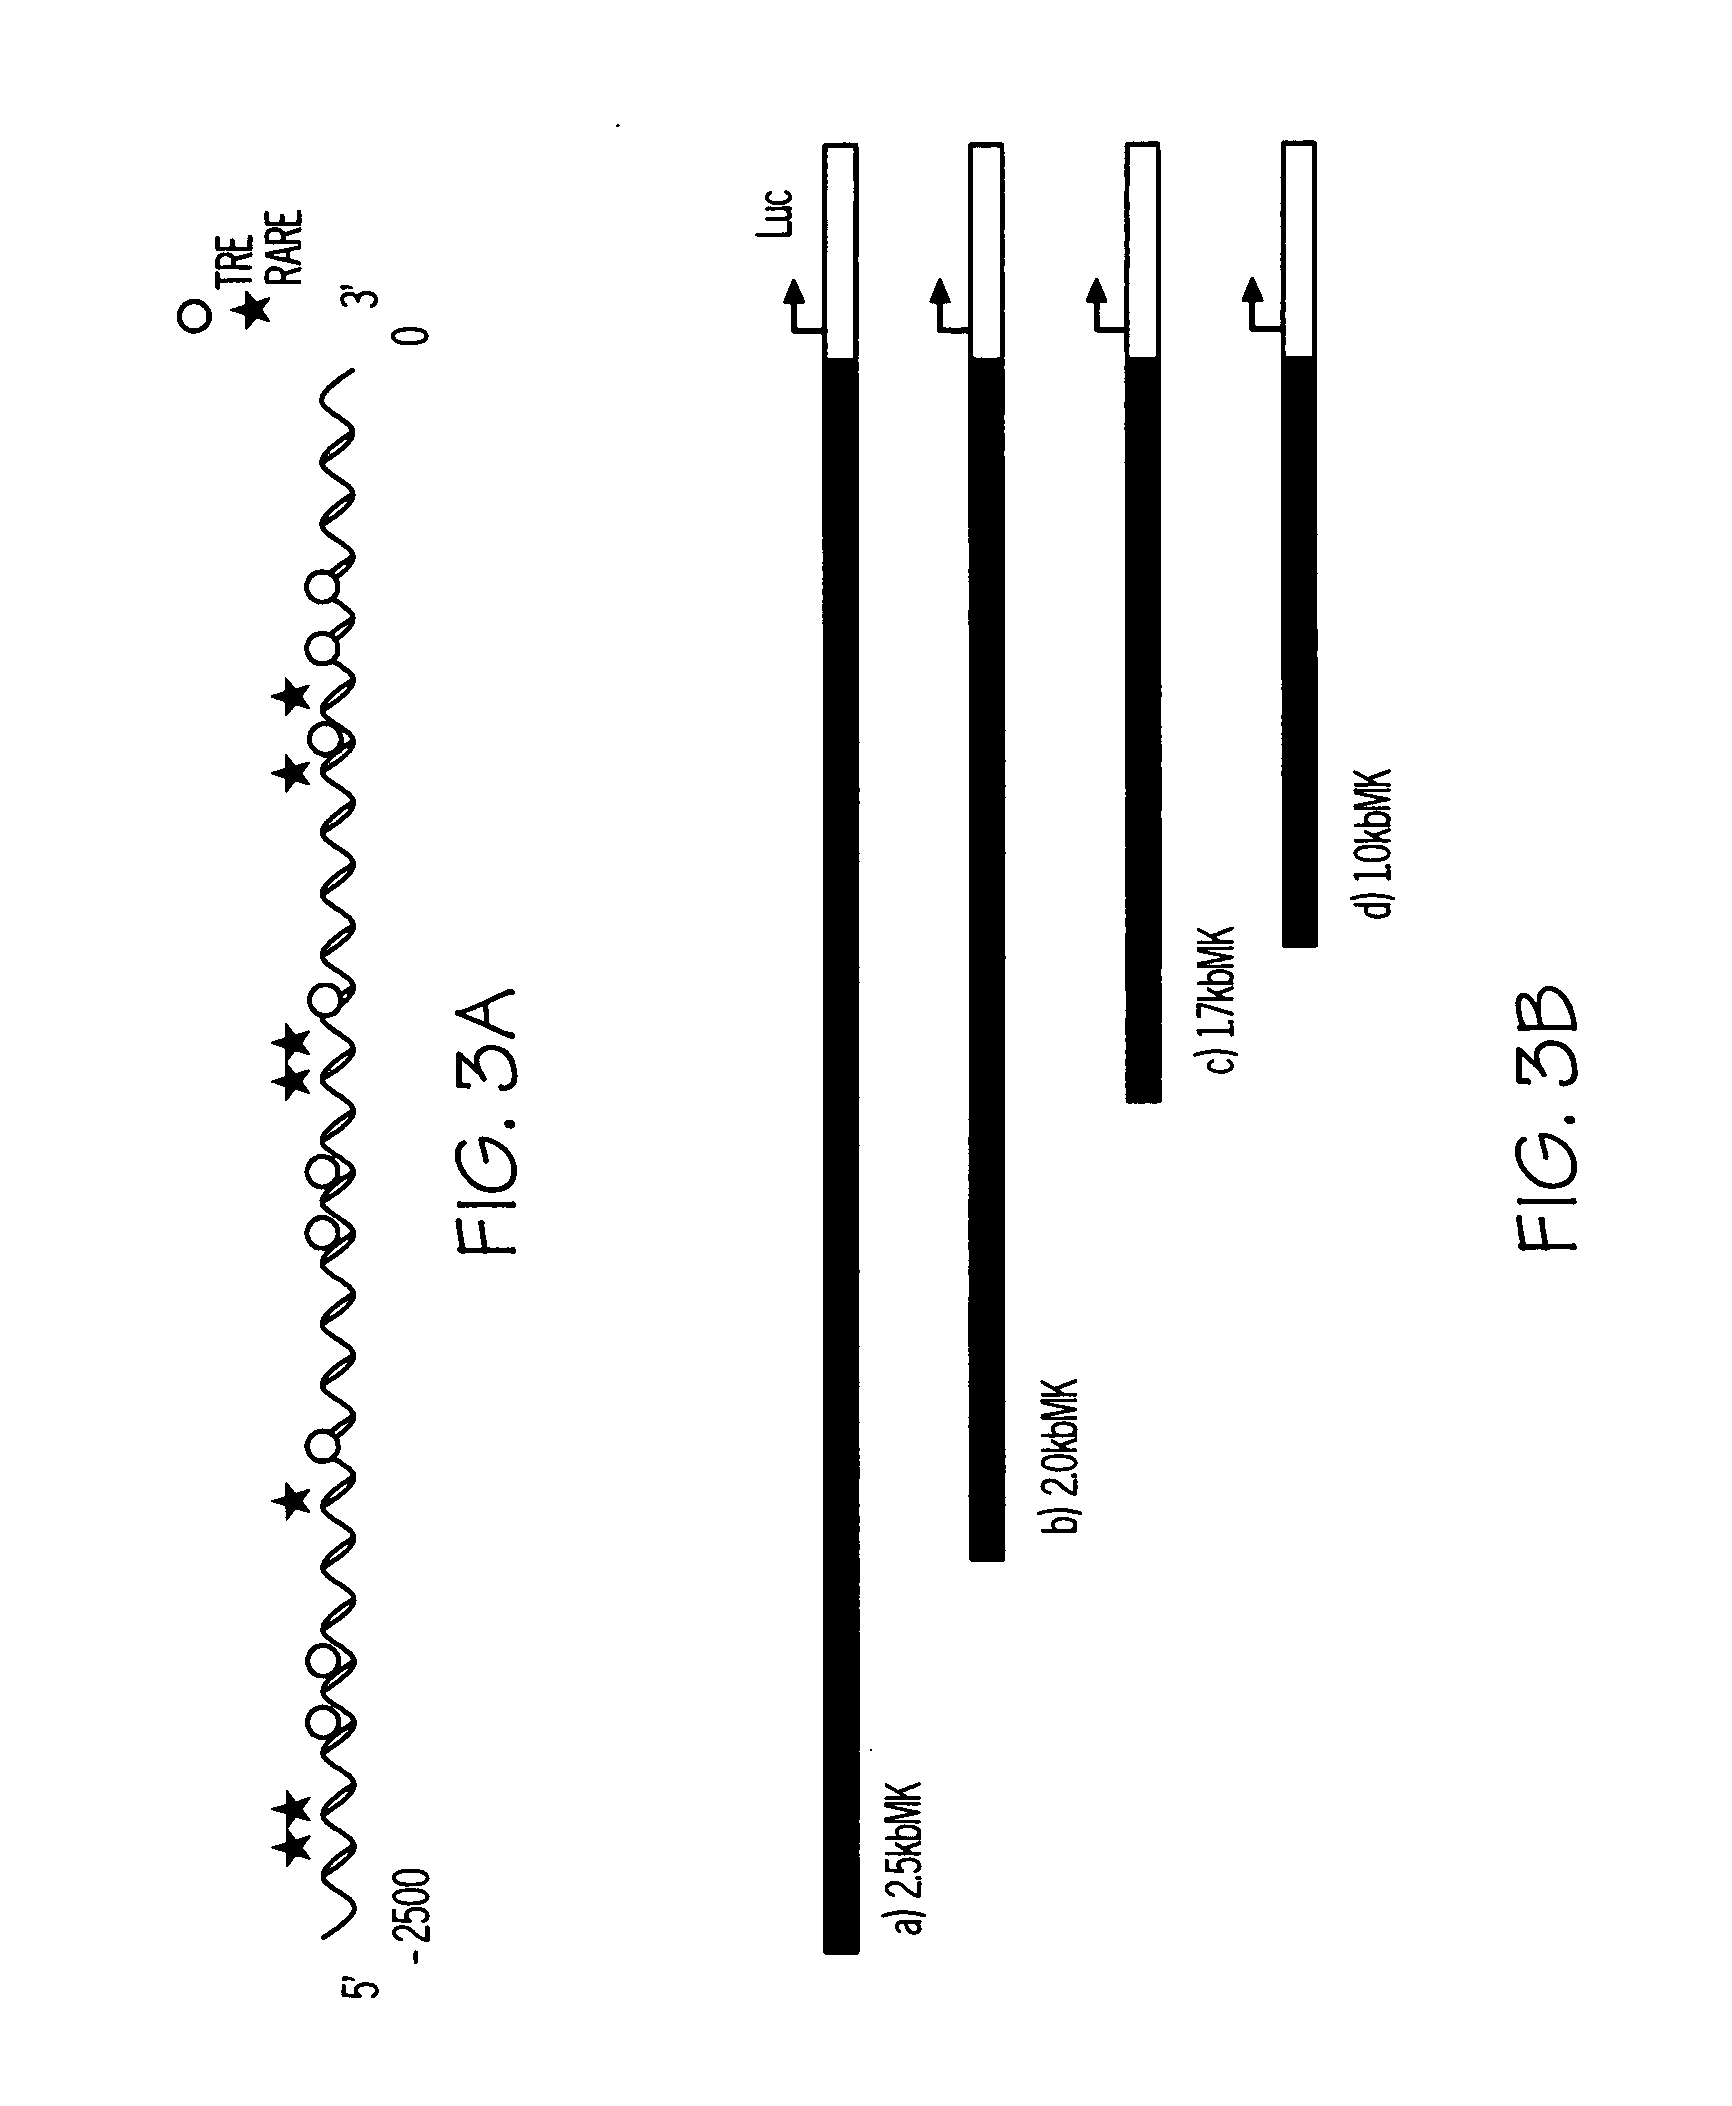 Method for diagnosis and treatment of pulmonary disorders